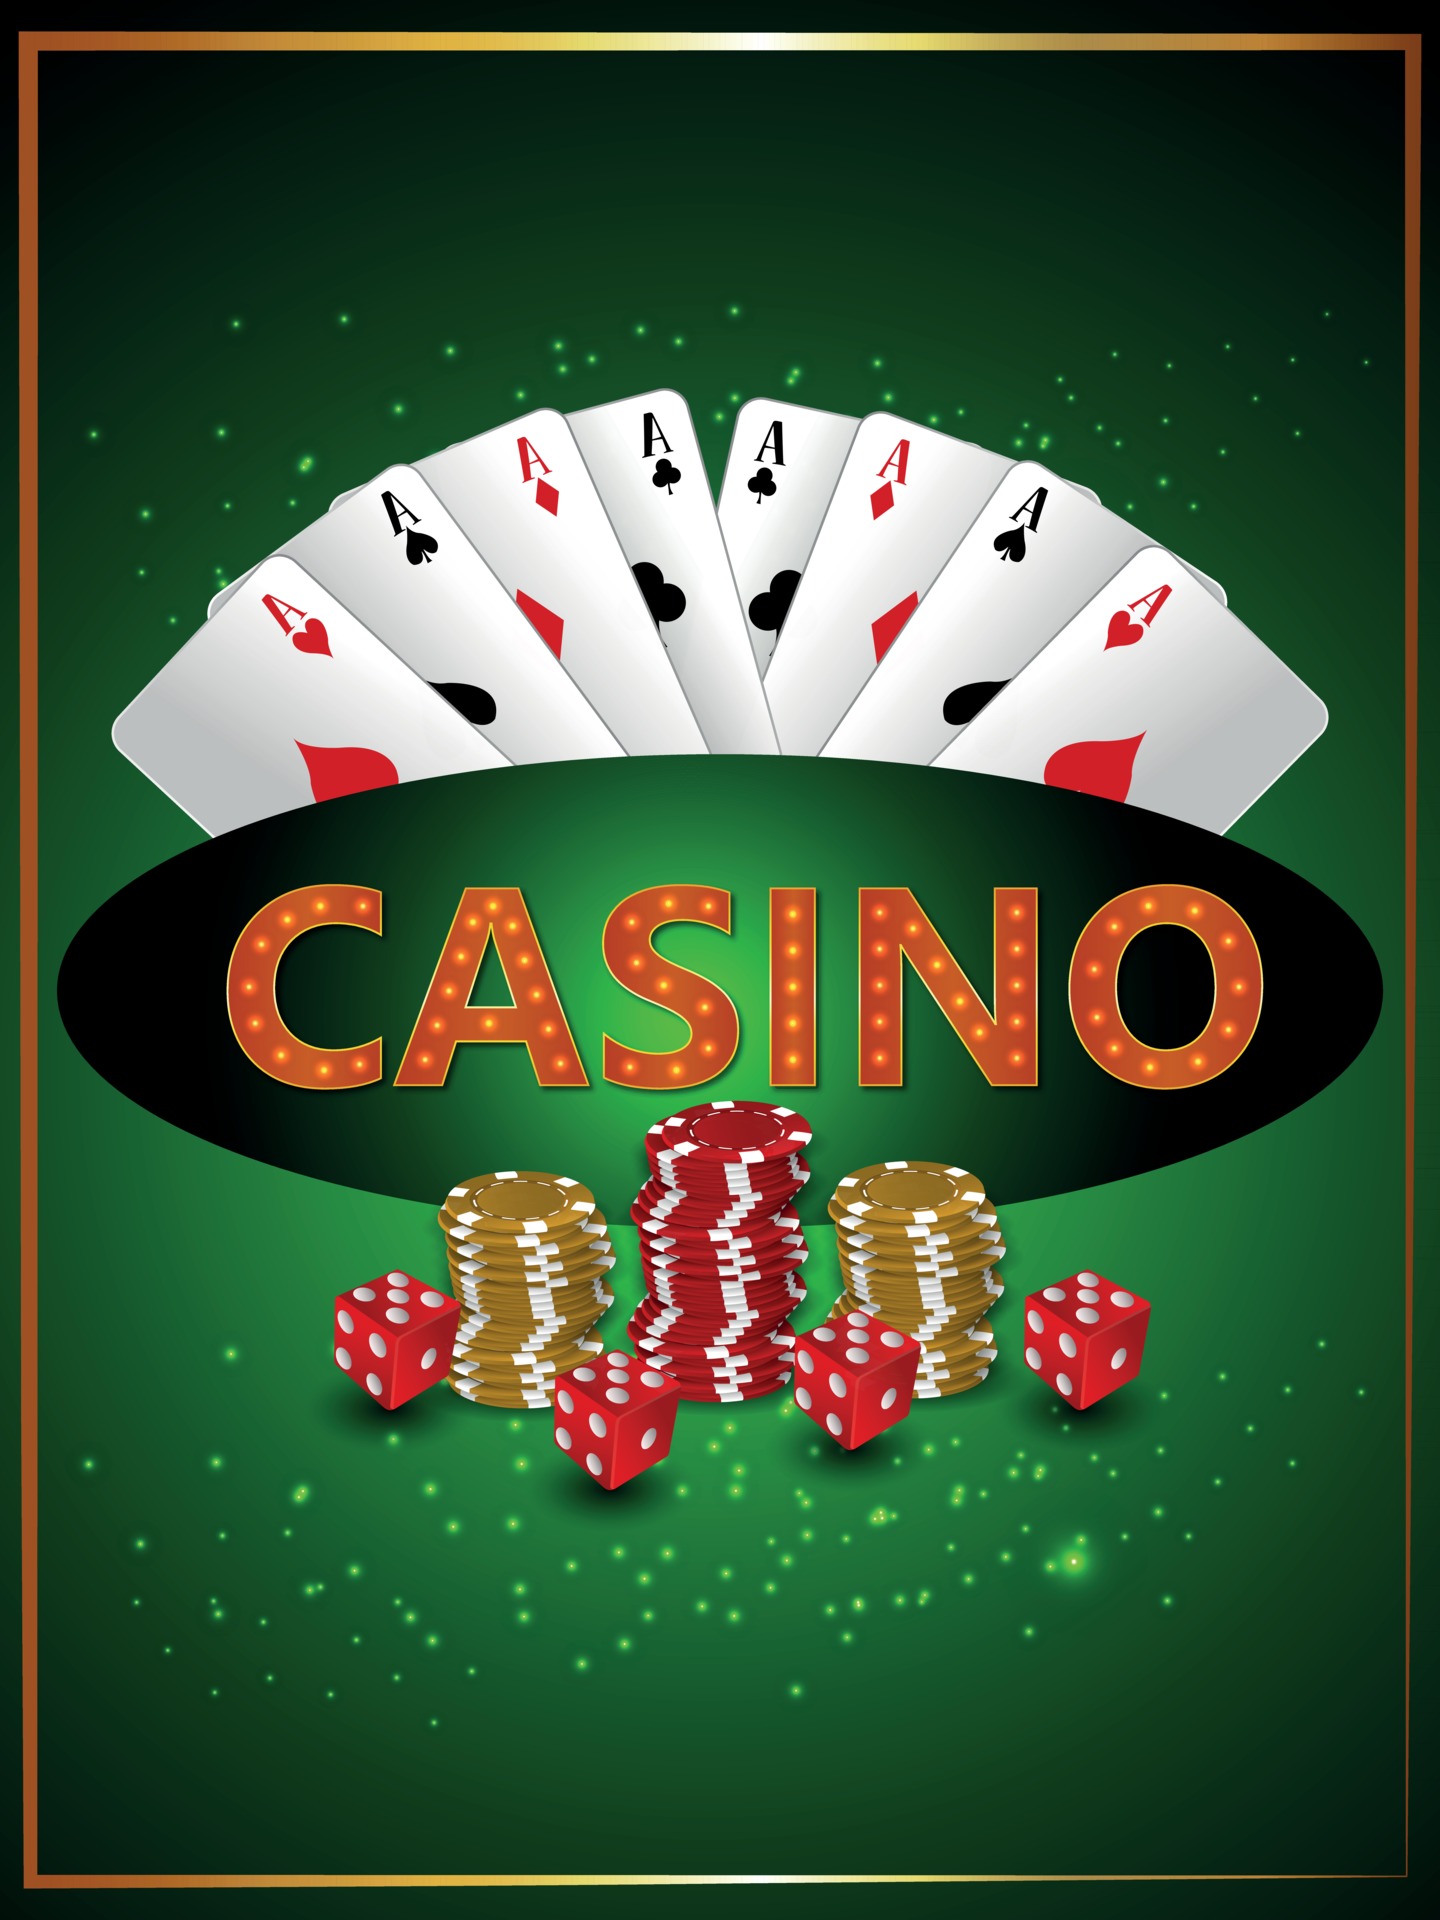 Casino gambling game with vector illustration of roulette wheel chips ...